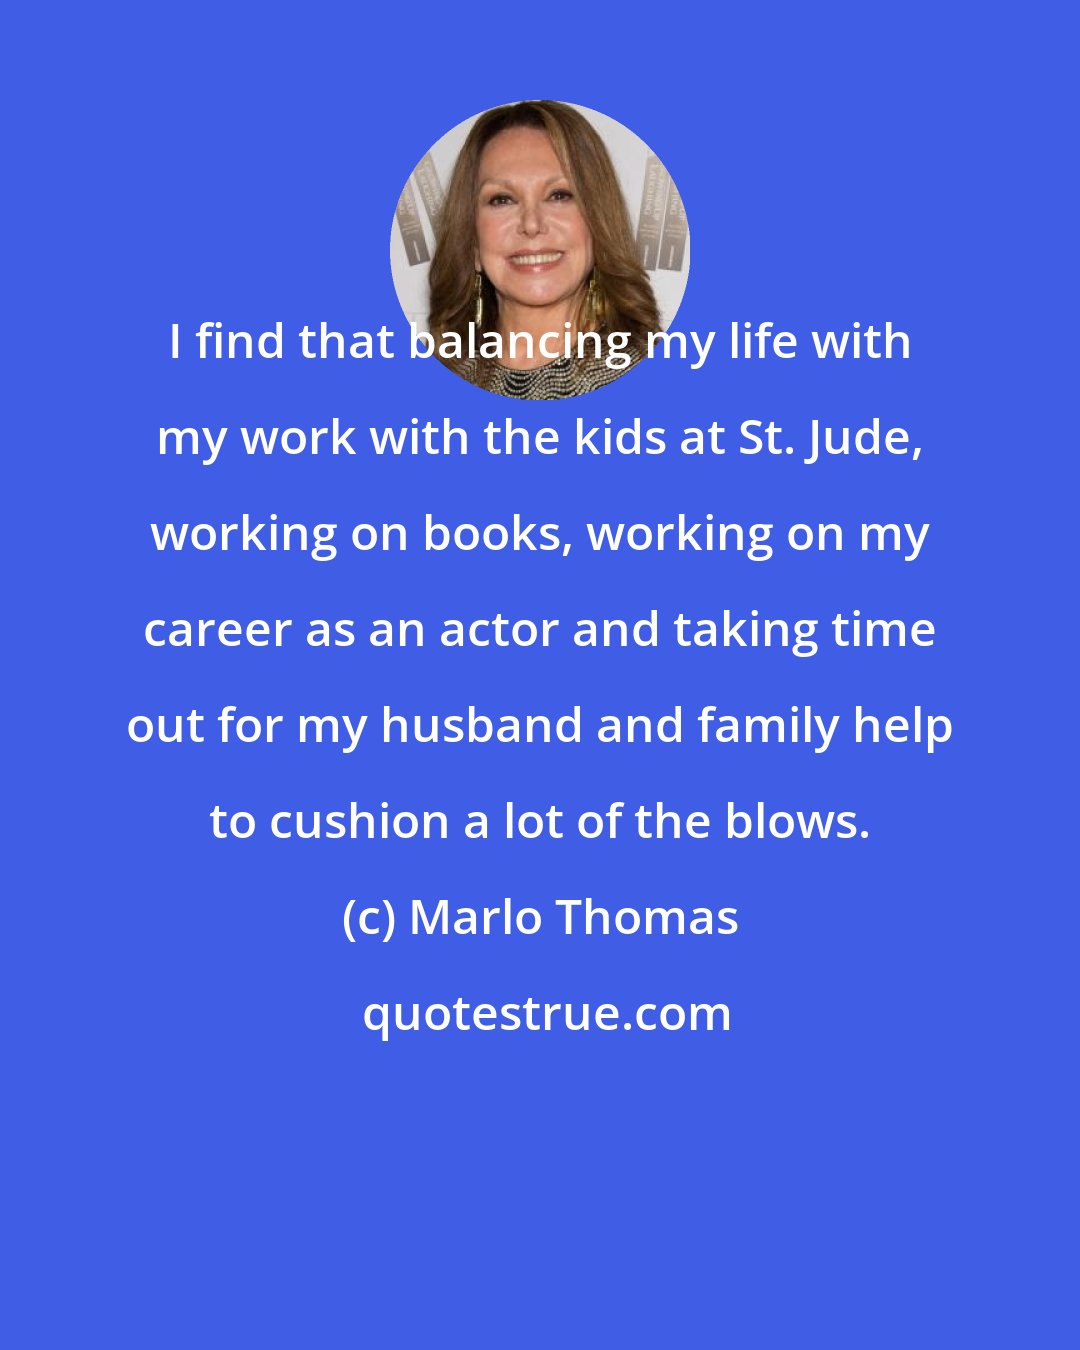 Marlo Thomas: I find that balancing my life with my work with the kids at St. Jude, working on books, working on my career as an actor and taking time out for my husband and family help to cushion a lot of the blows.